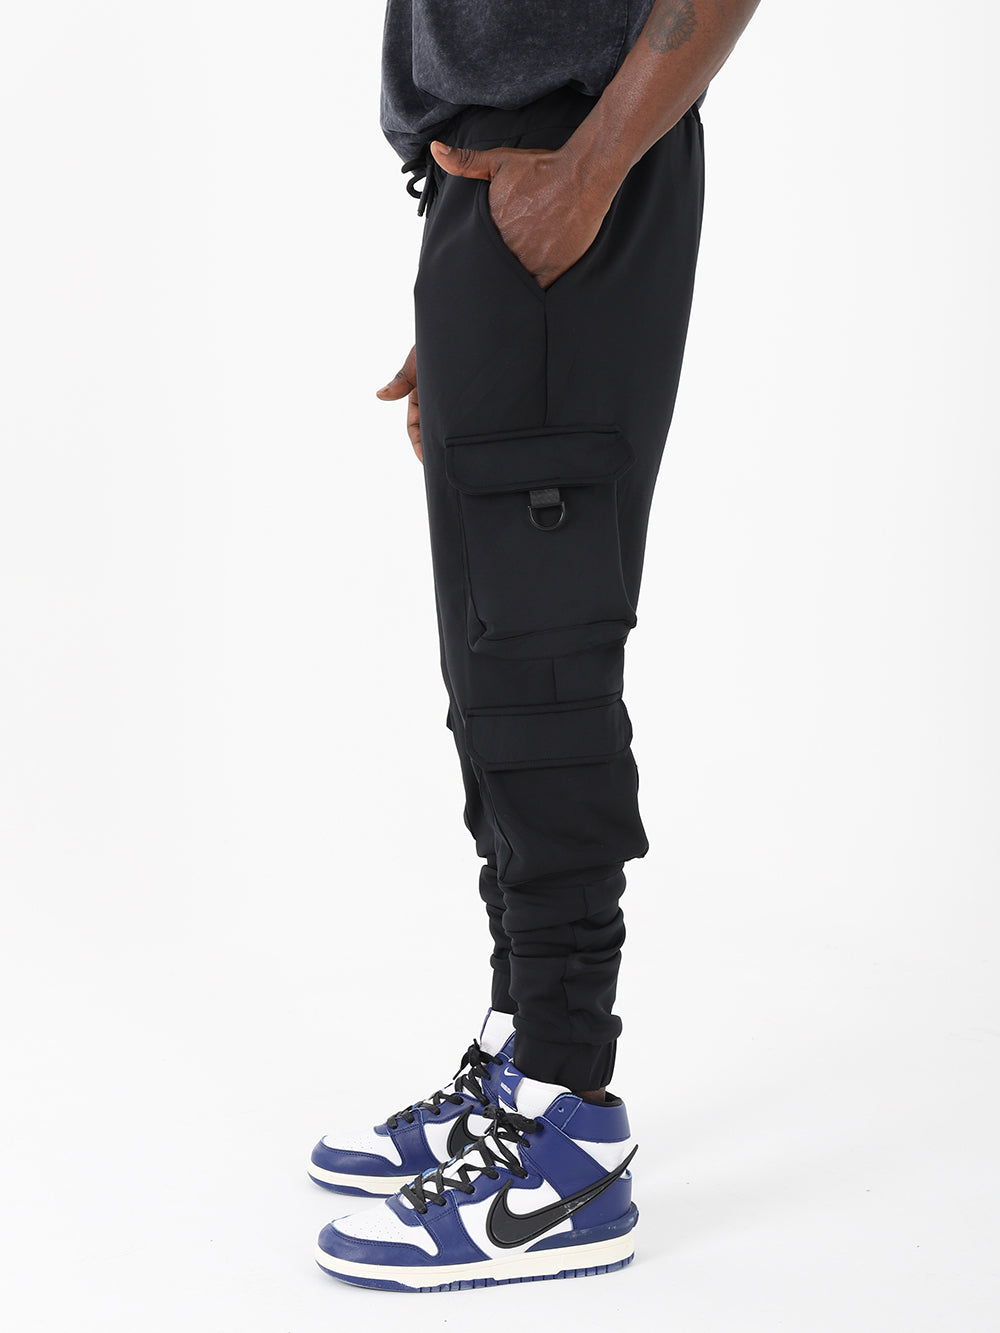 A man wearing VENTURA JOGGERS with adjustable ankle cuffs and a drawstring waist, paired with sneakers.